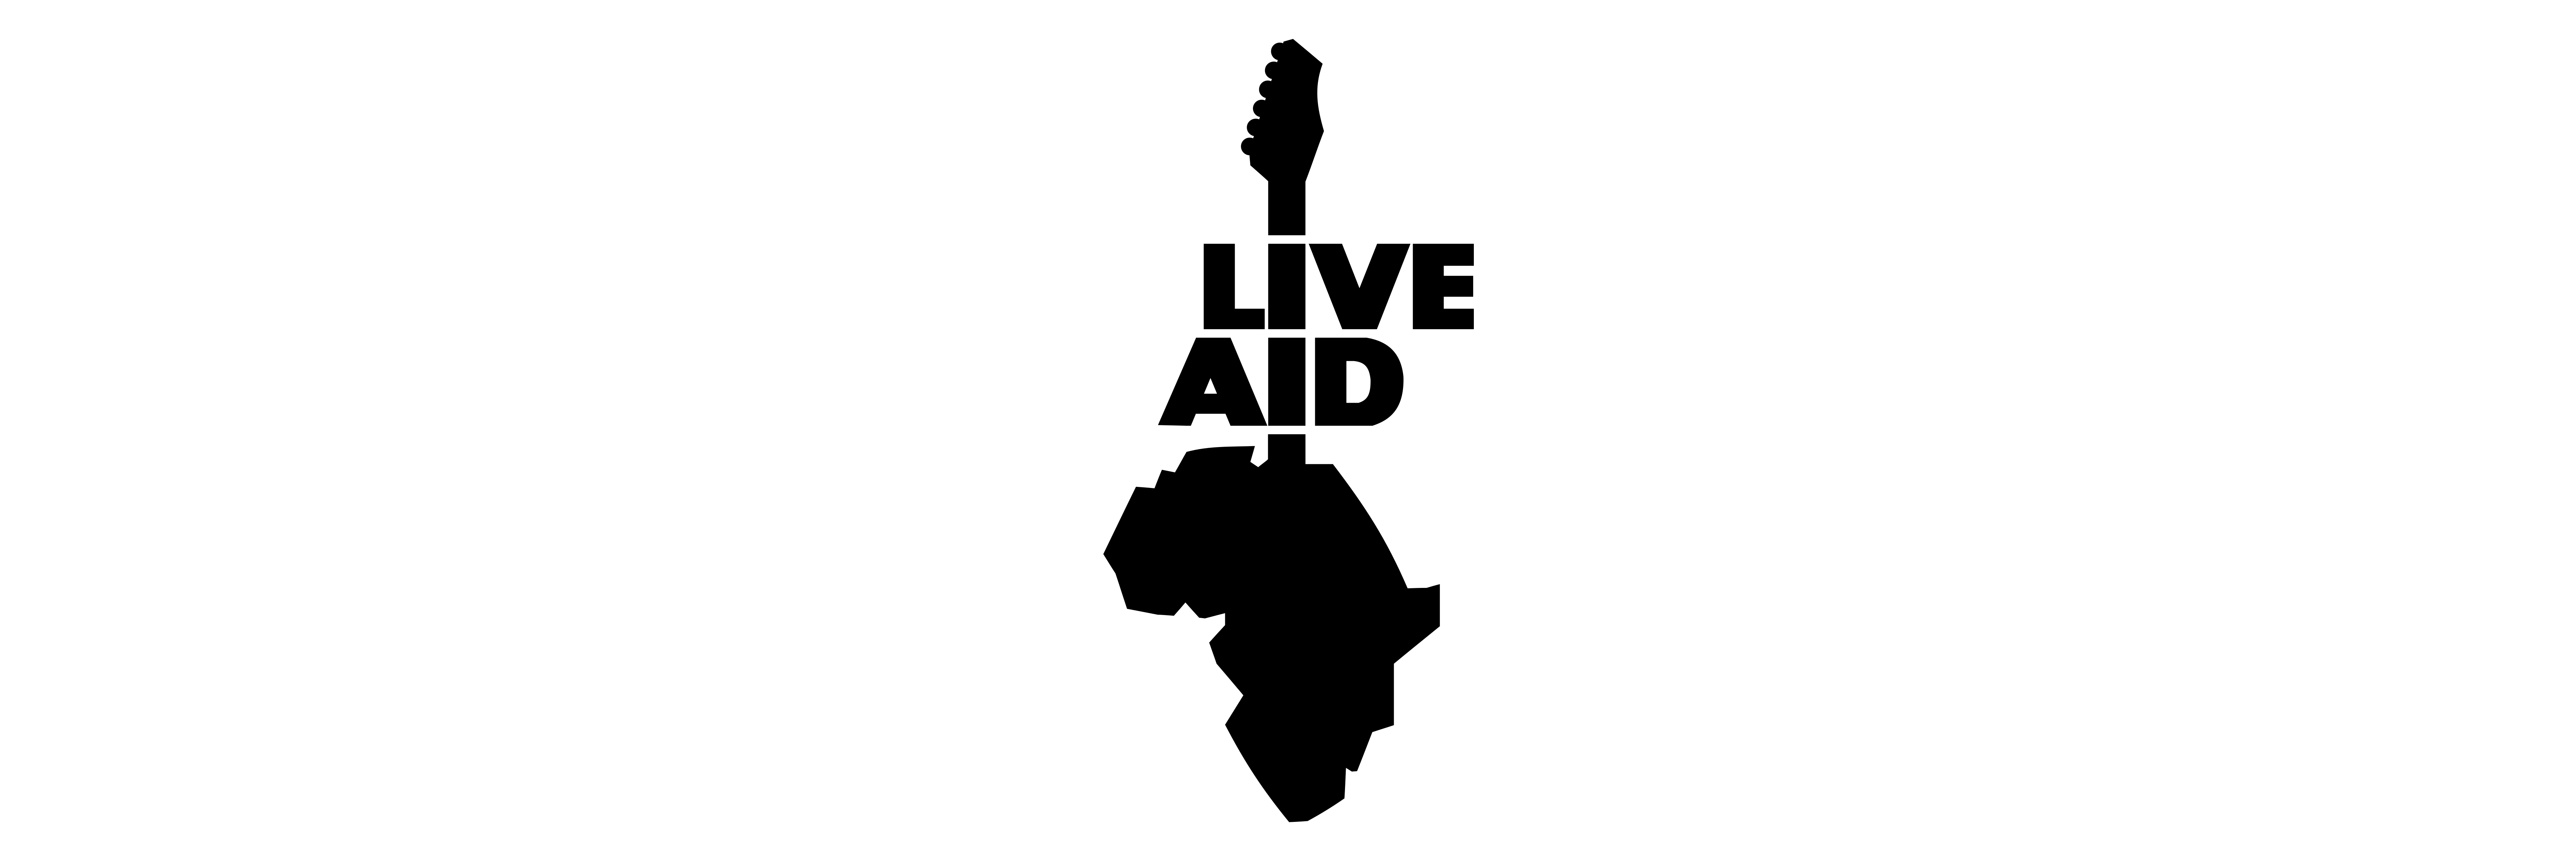 Live Aid going to 11